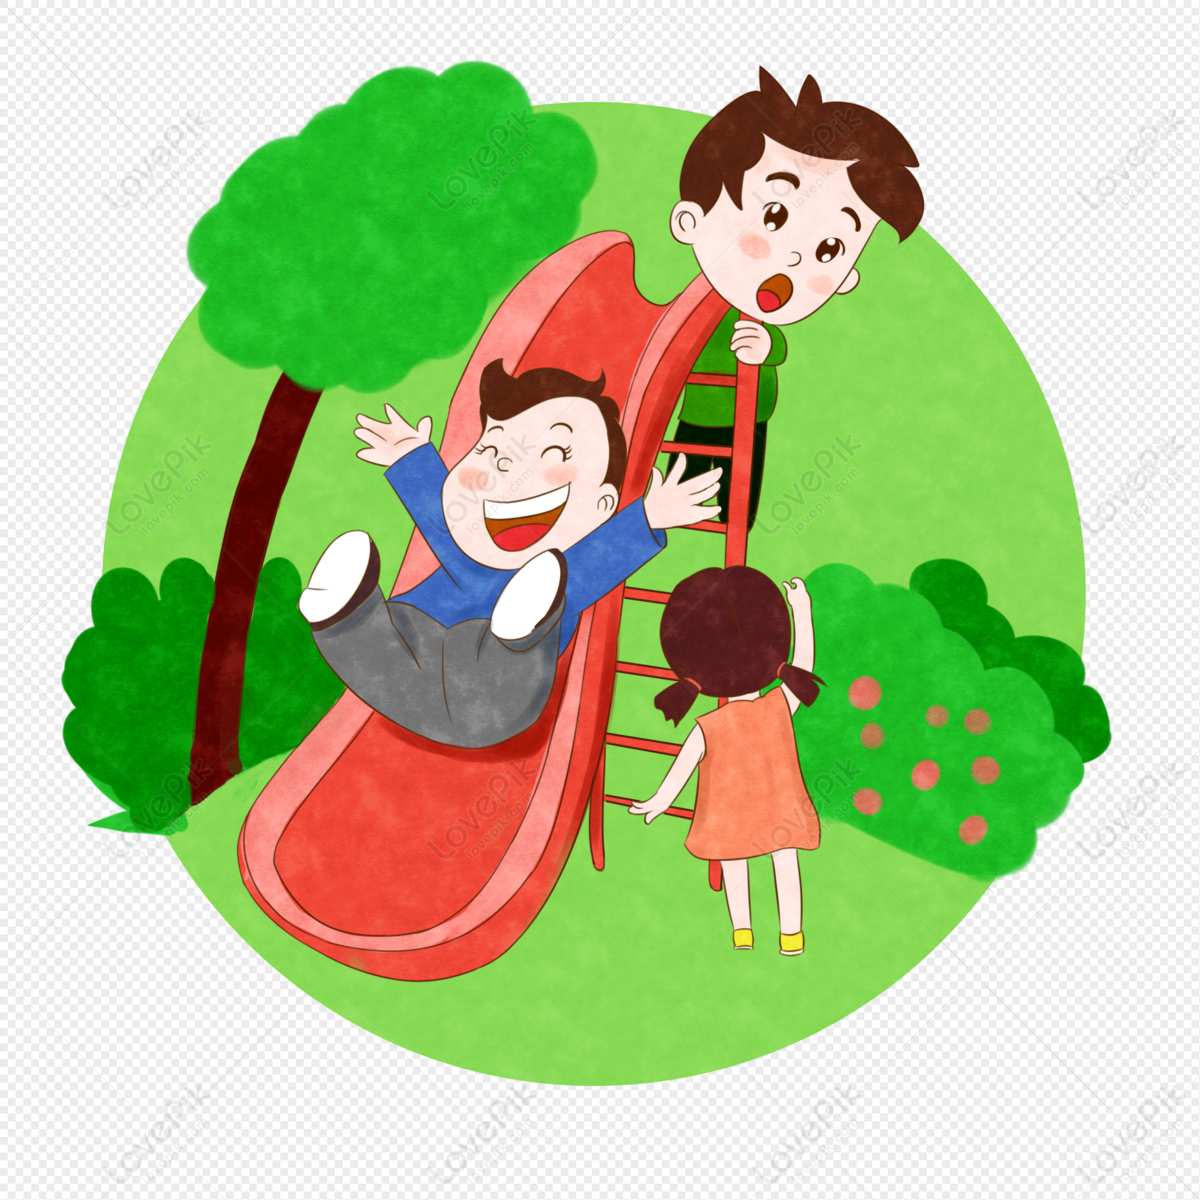 Child Playing On The Slide PNG Hd Transparent Image And Clipart Image ...